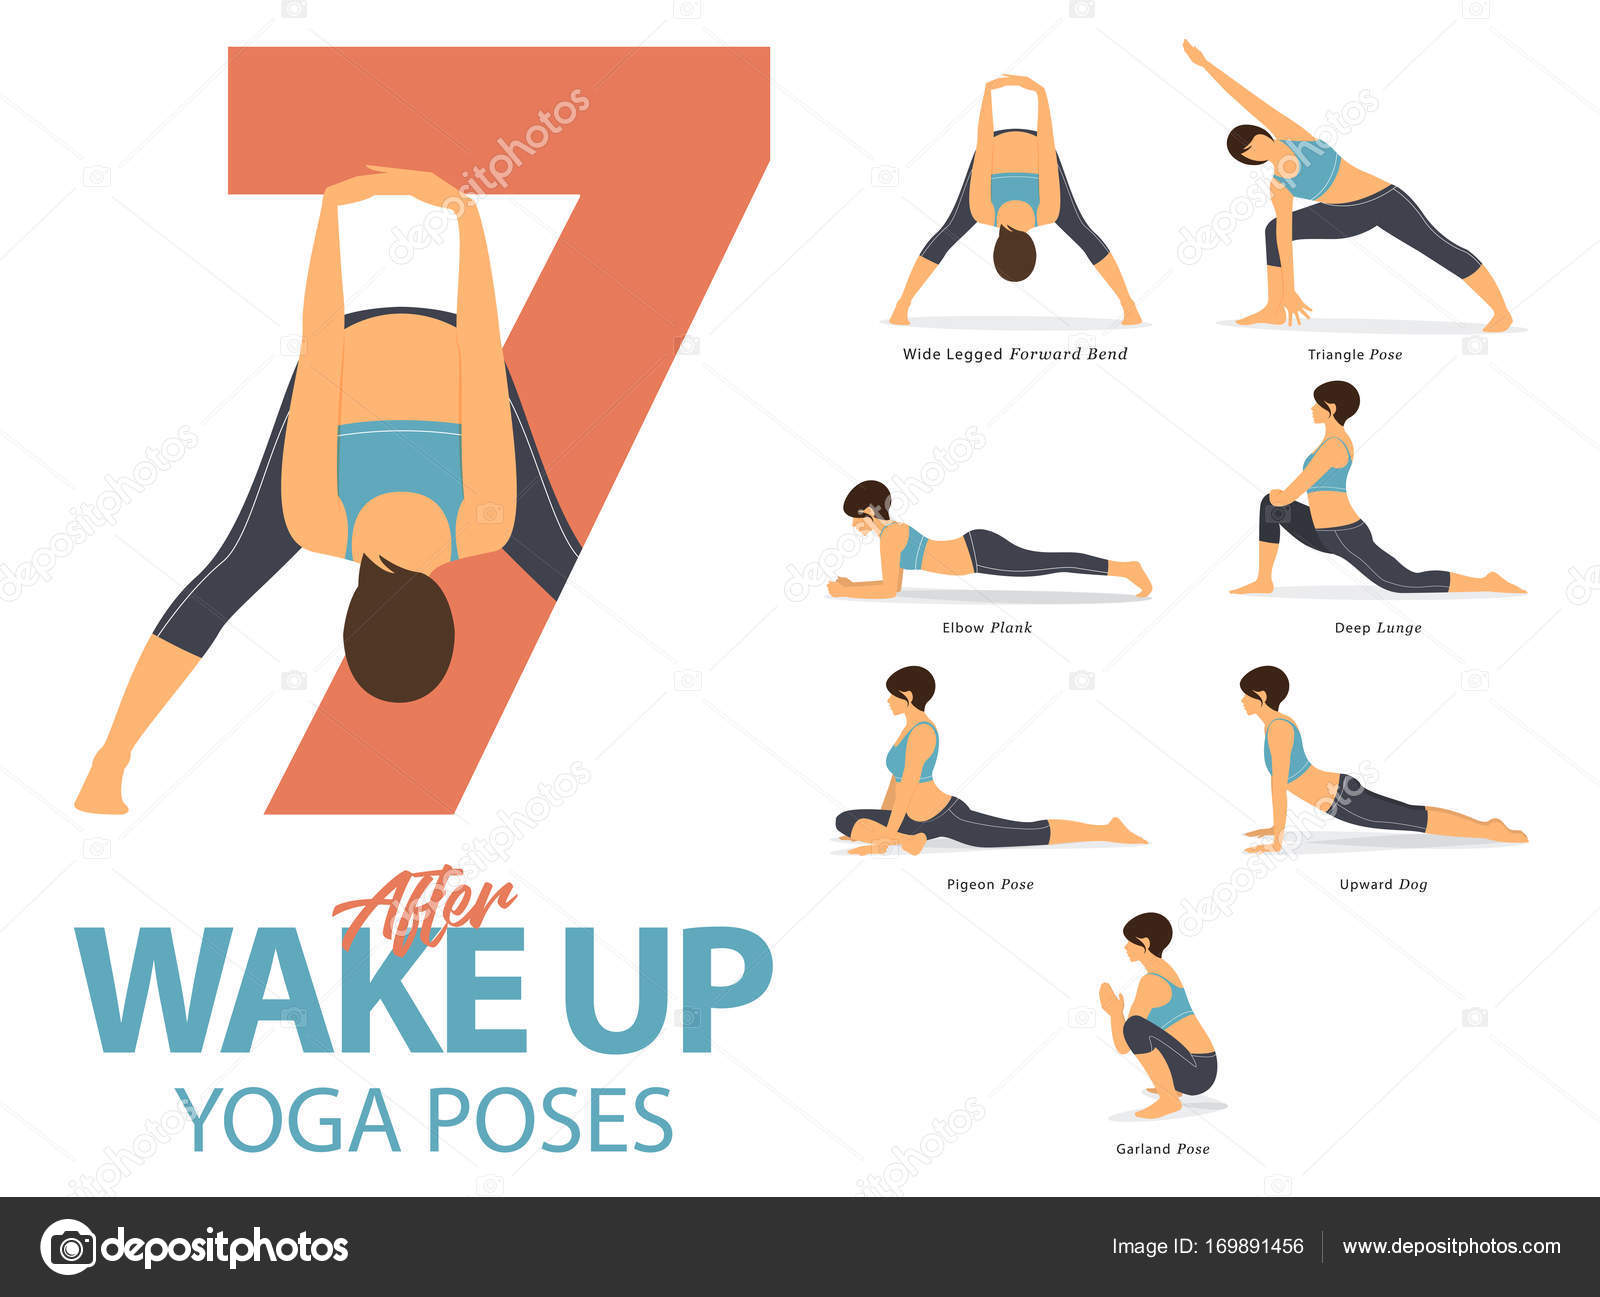 A Set Of Yoga Postures Female Figures For Infographic 7 Yoga Poses For Exercise After Wake Up In Flat Design Vector Vector Image By C Tond Ruangwit Gmail Com Vector Stock 169891456